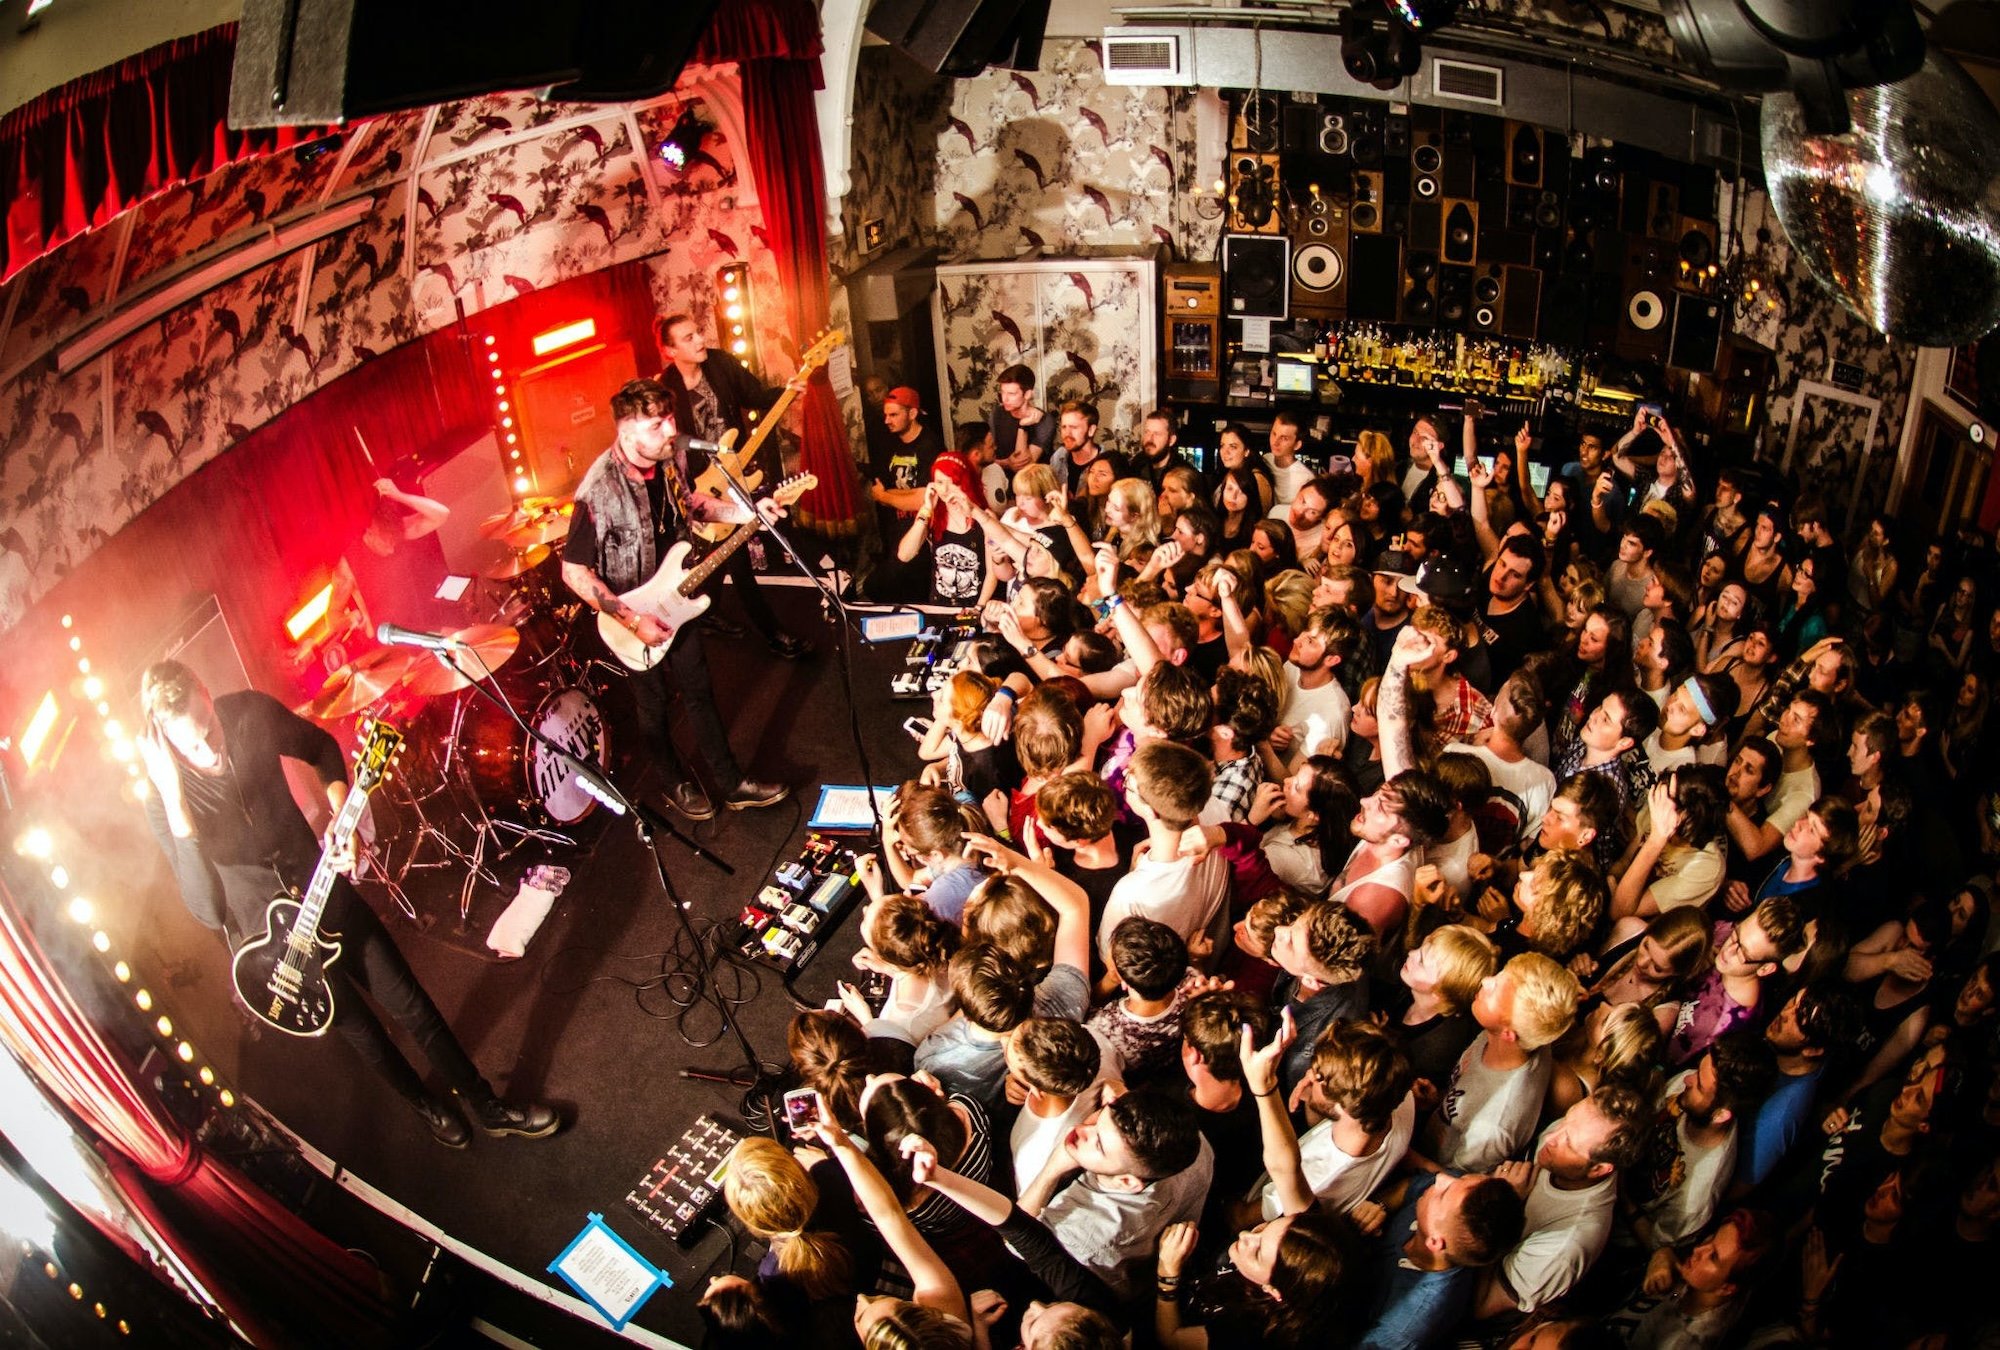 small music venues across manchester include the Deaf Institute